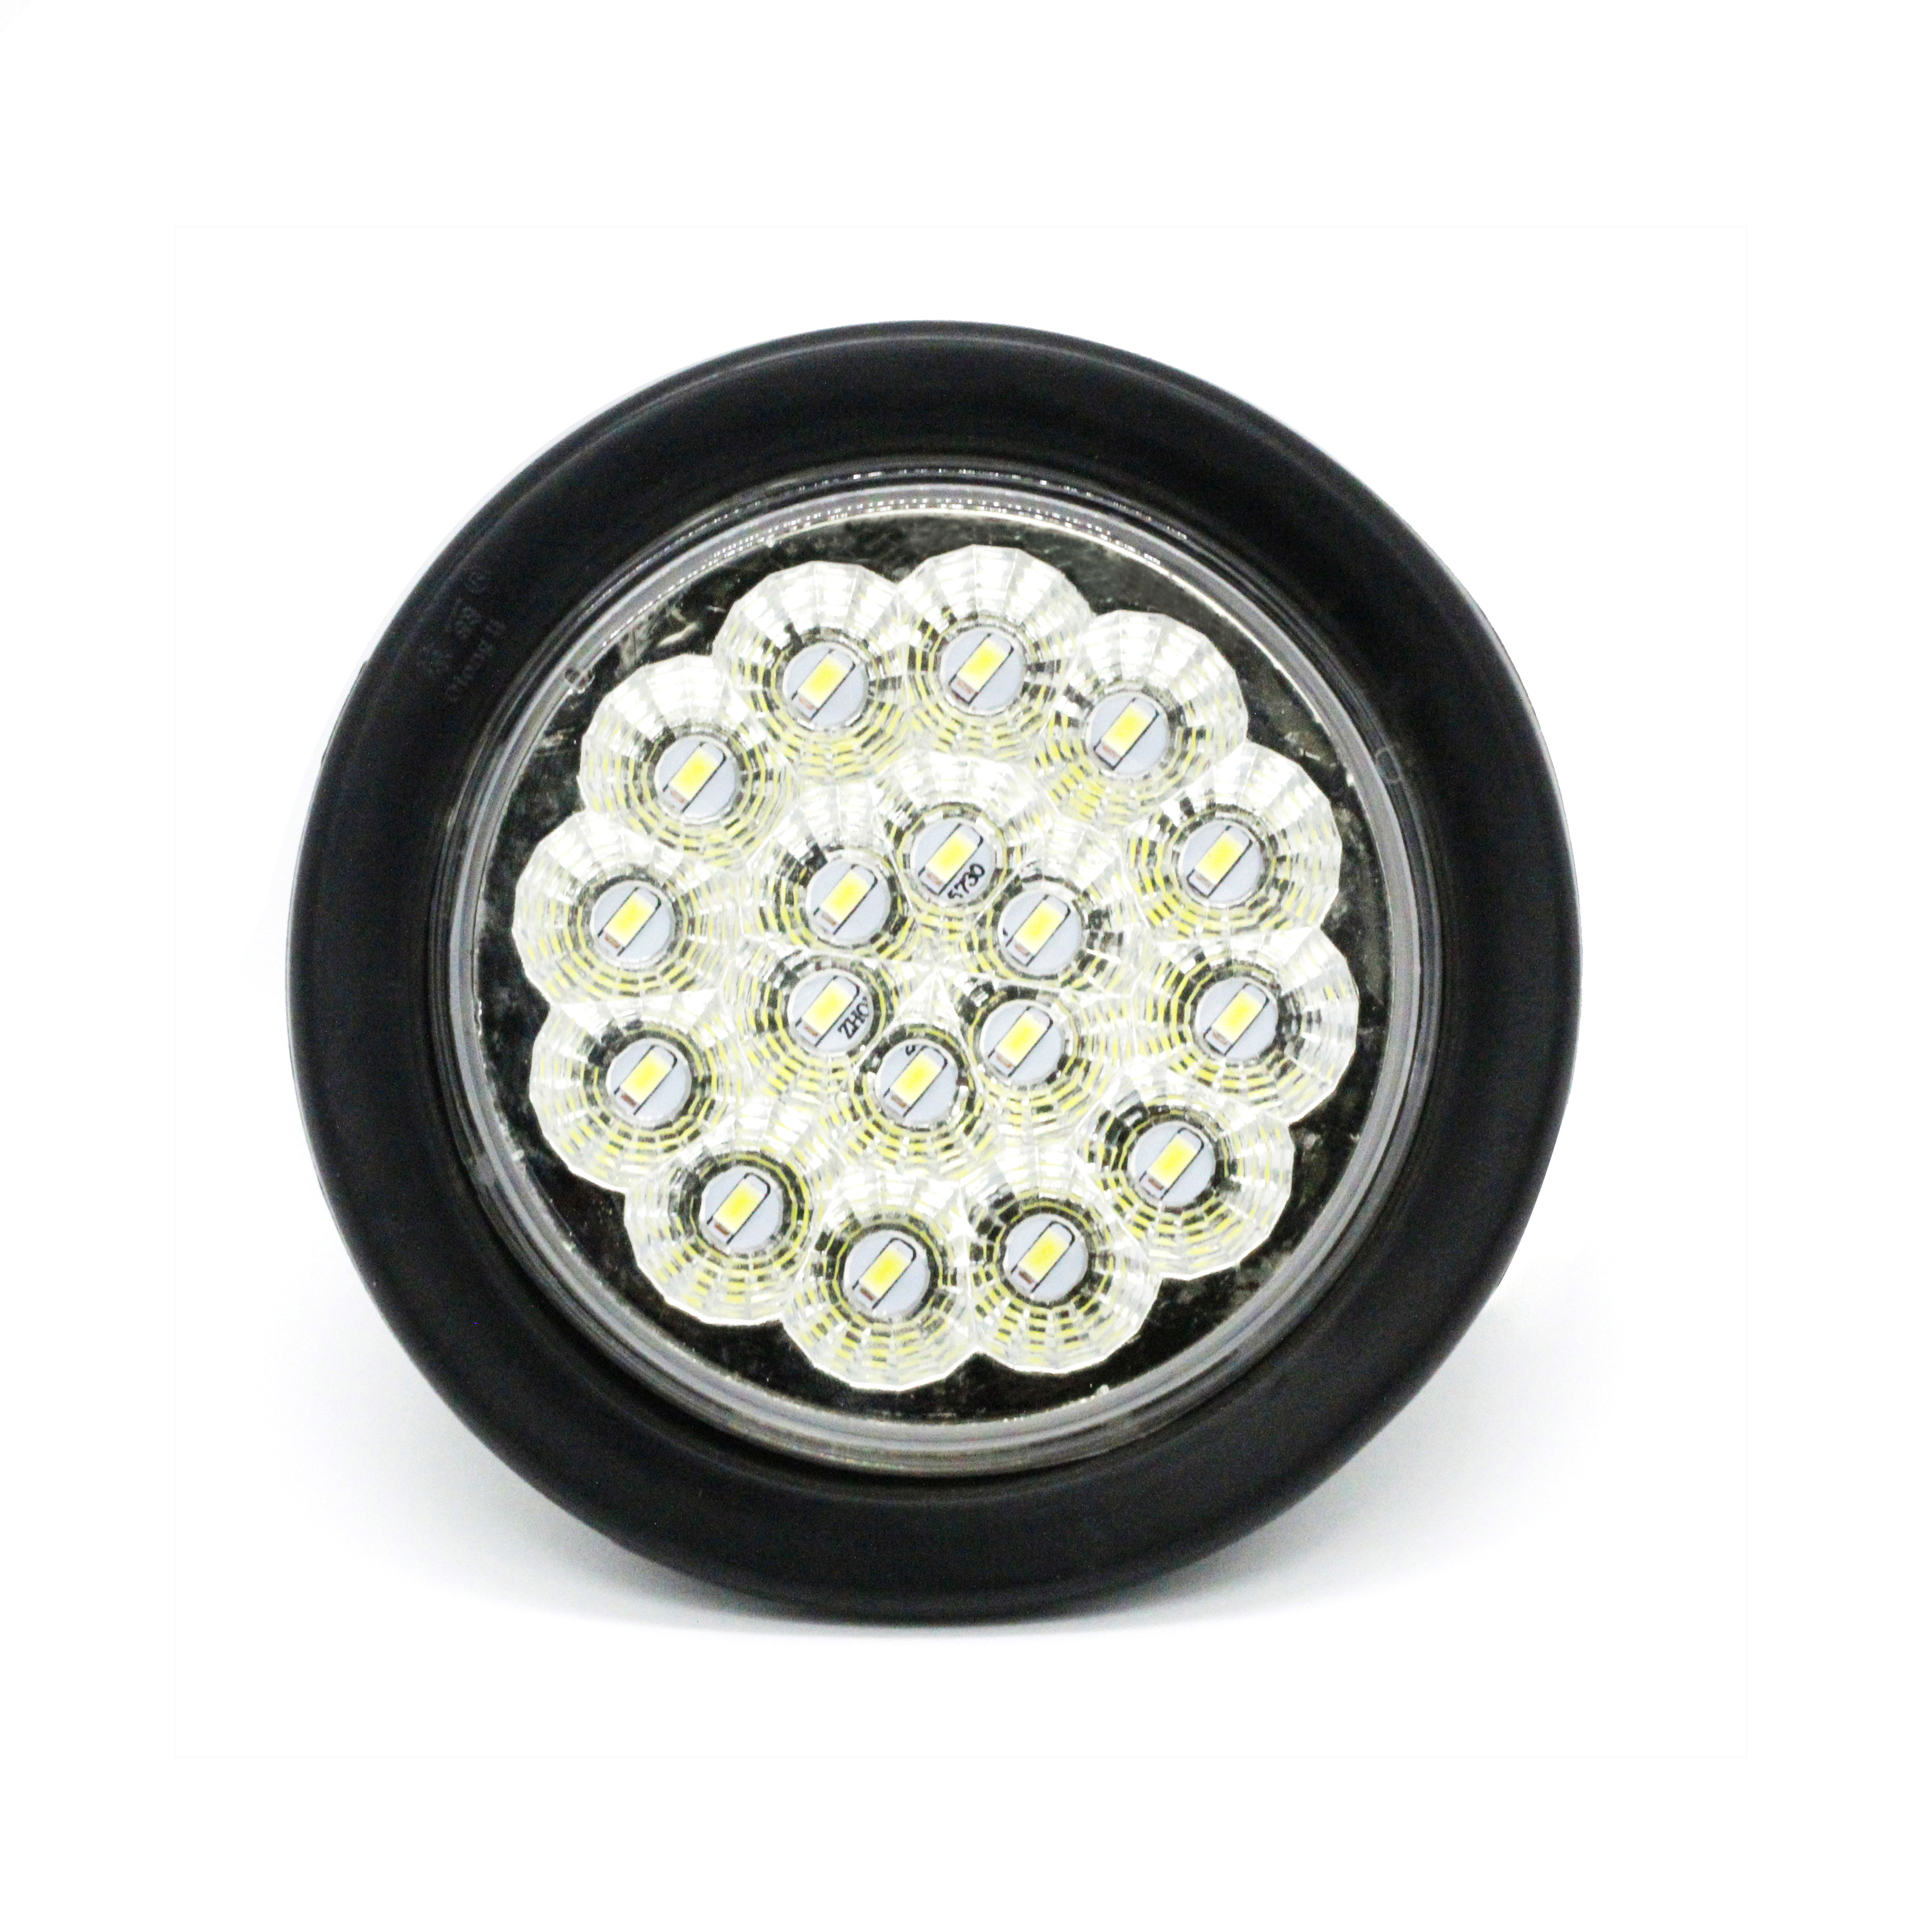 4 inch round 18 leds stop turn tail lamp with rubber grommets 